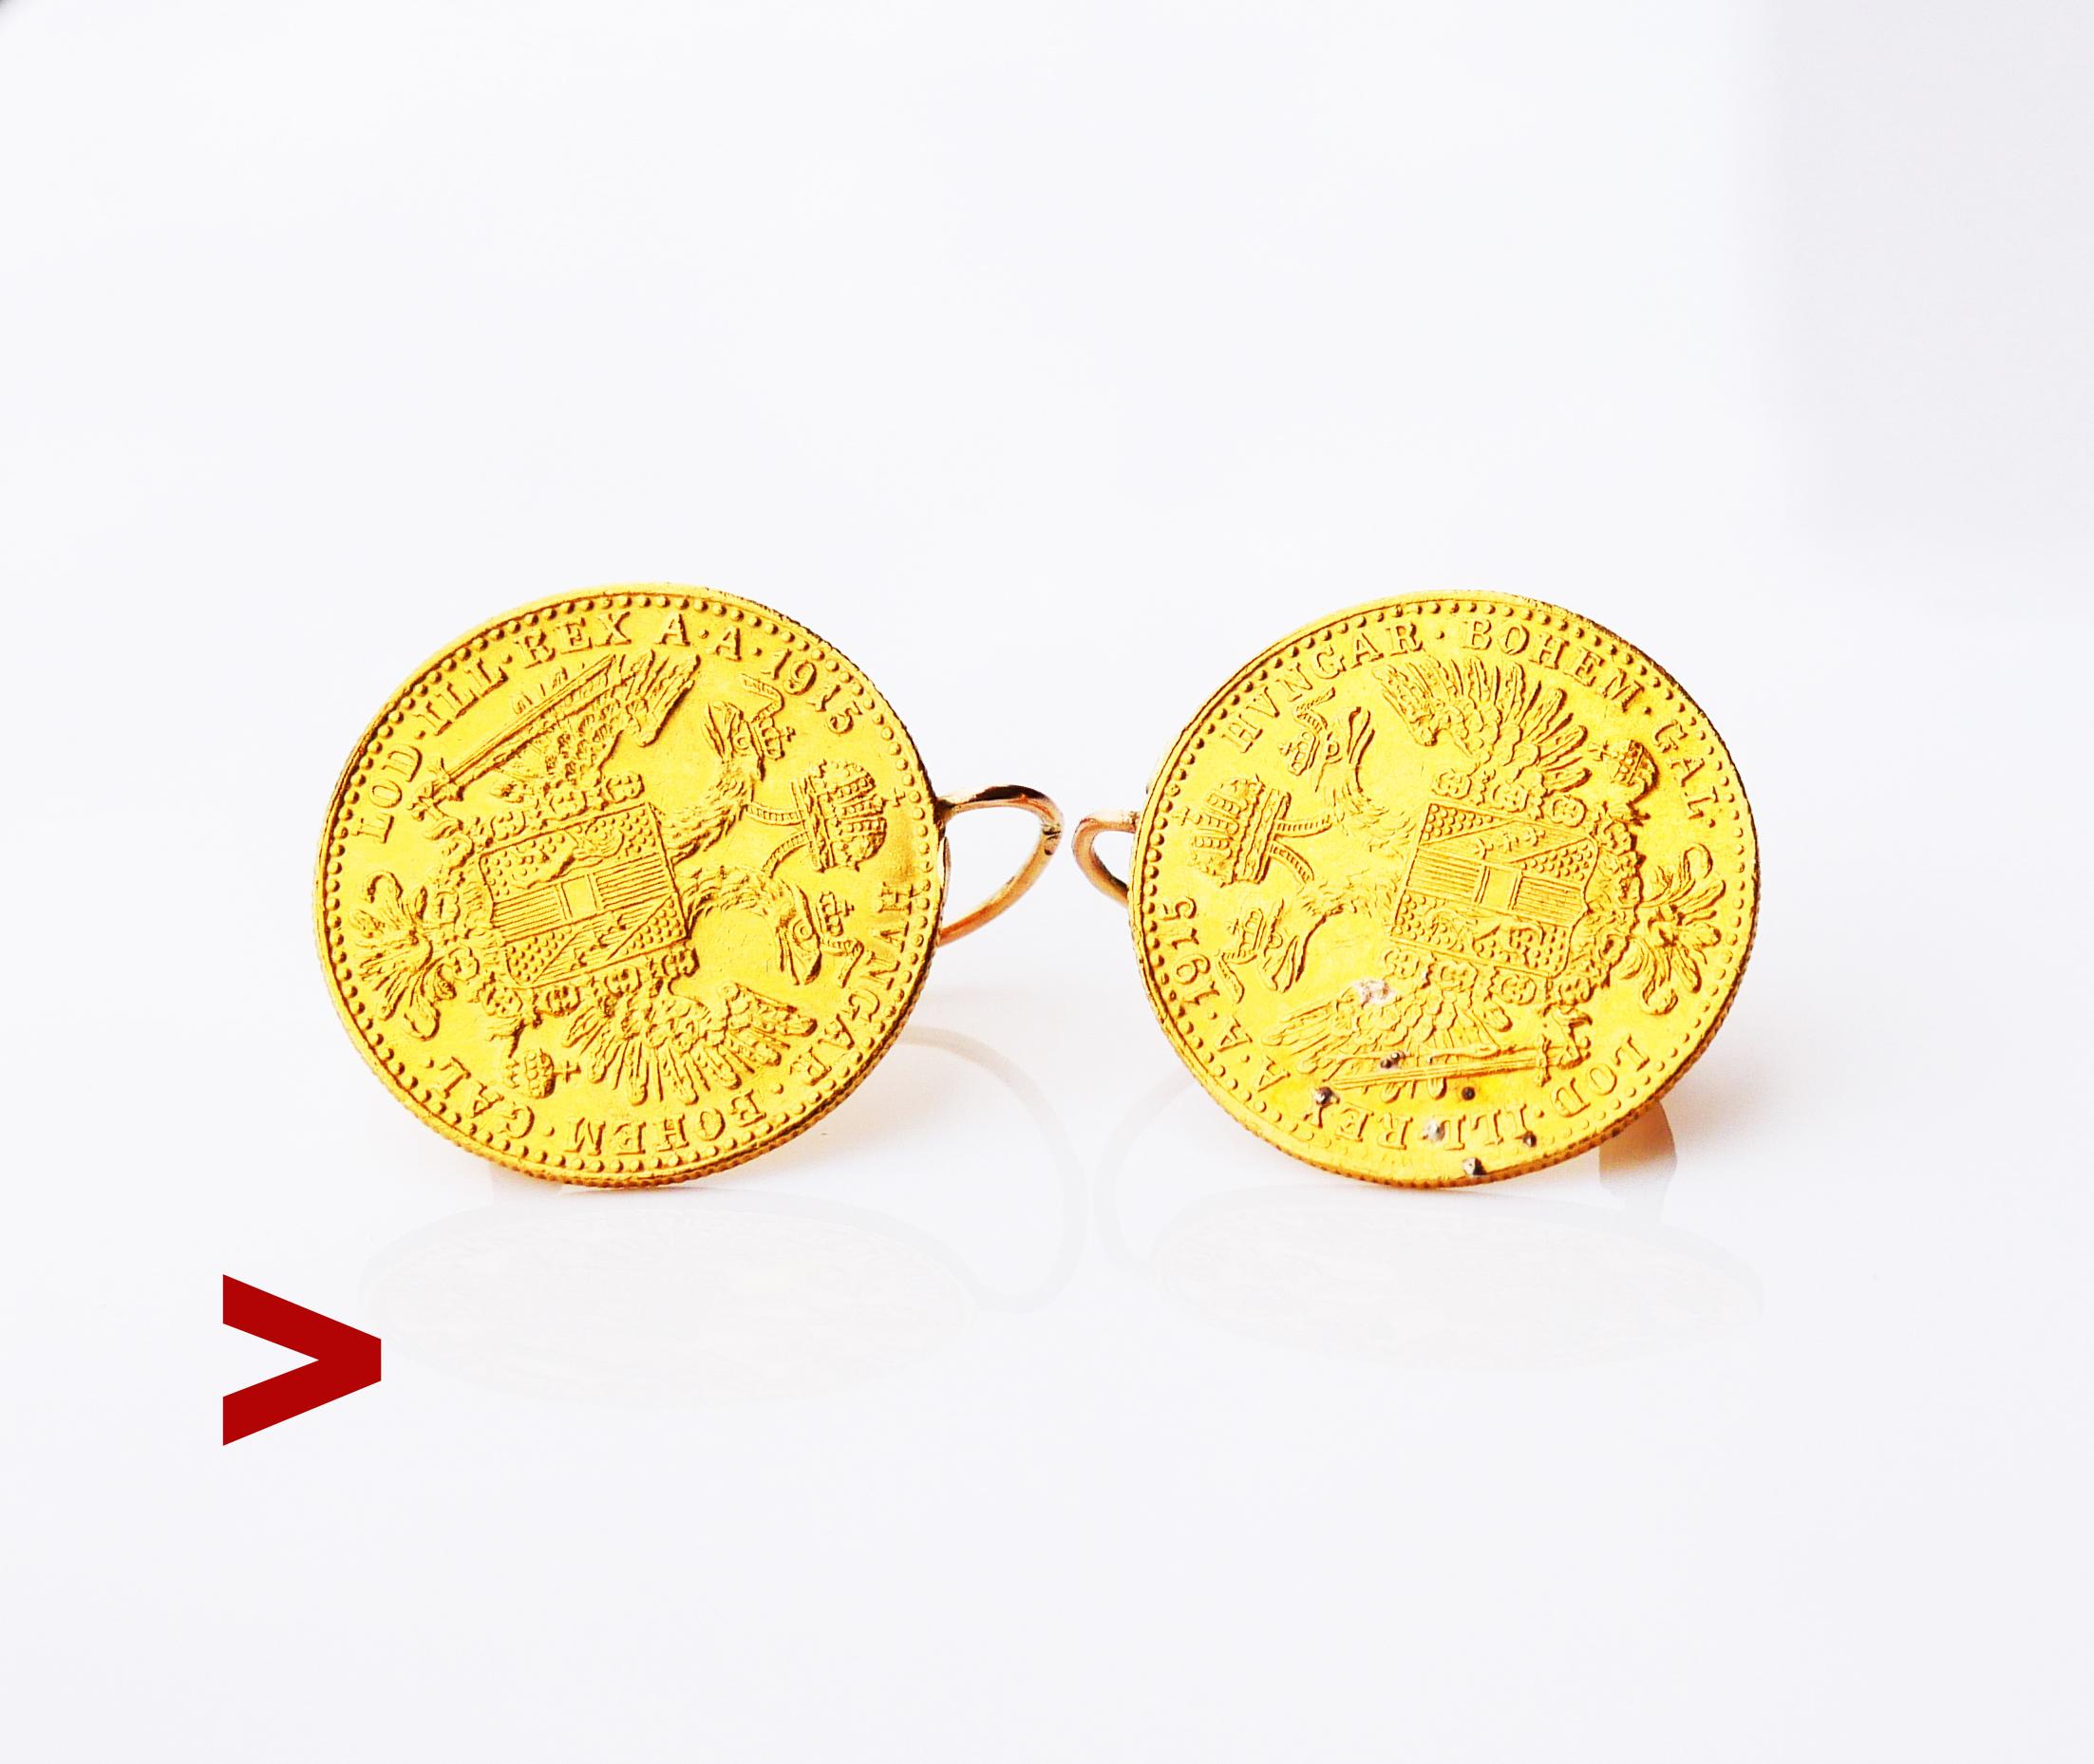 Antique Austrian Earrings Coins featuring one Austrian 23K Gold Ducat coin on each piece soldered with folding hooks in solid 14K Rose Cold.

Wires hallmarked with early 20th century Austrian Imperial standard hallmarks, enclosed head of a horse